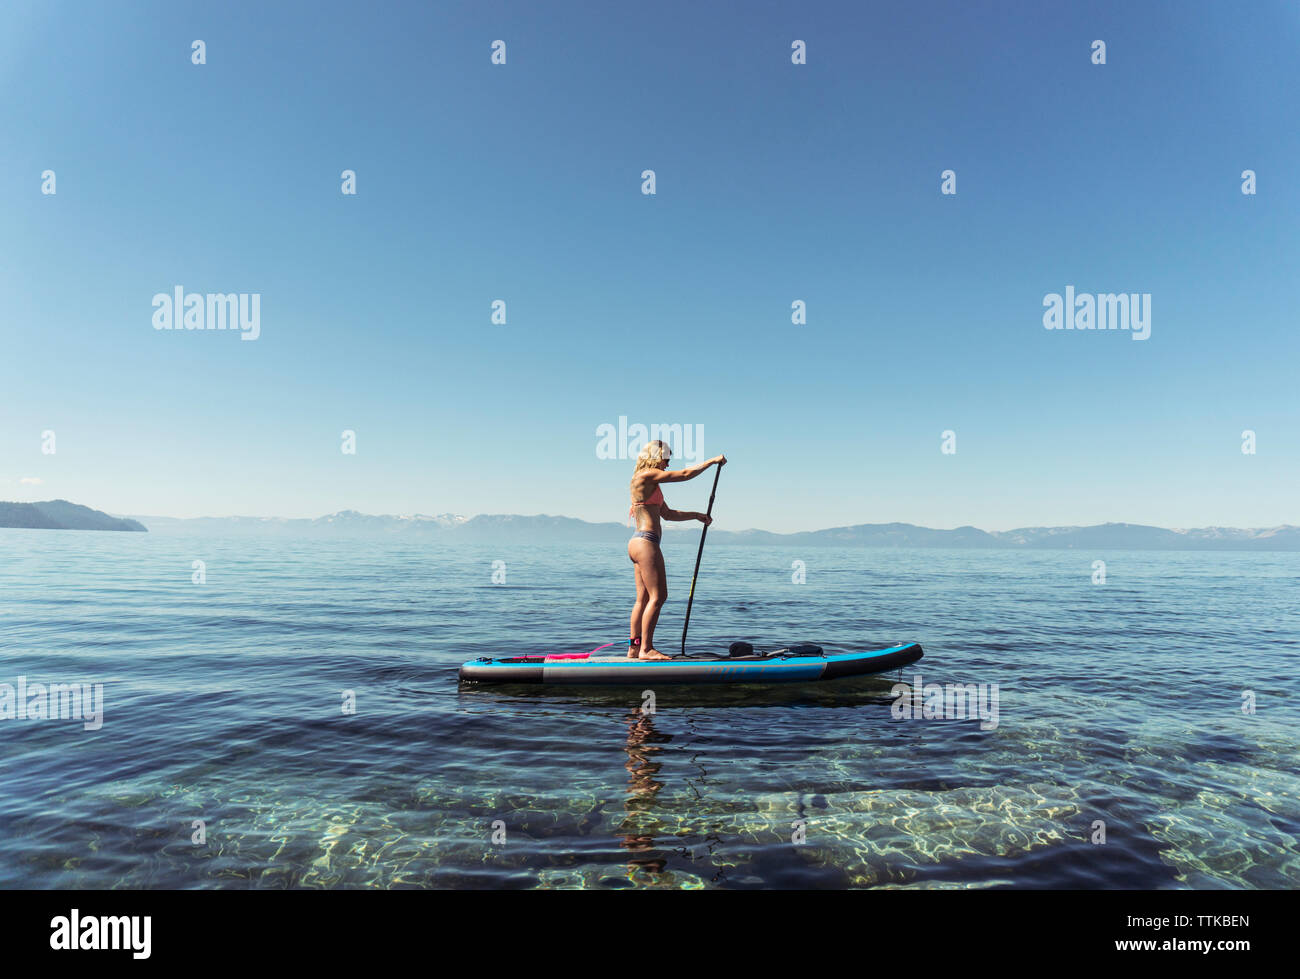 Side view of woman in bikini paddleboarding on lake against clear blue sky during sunny day Stock Photo